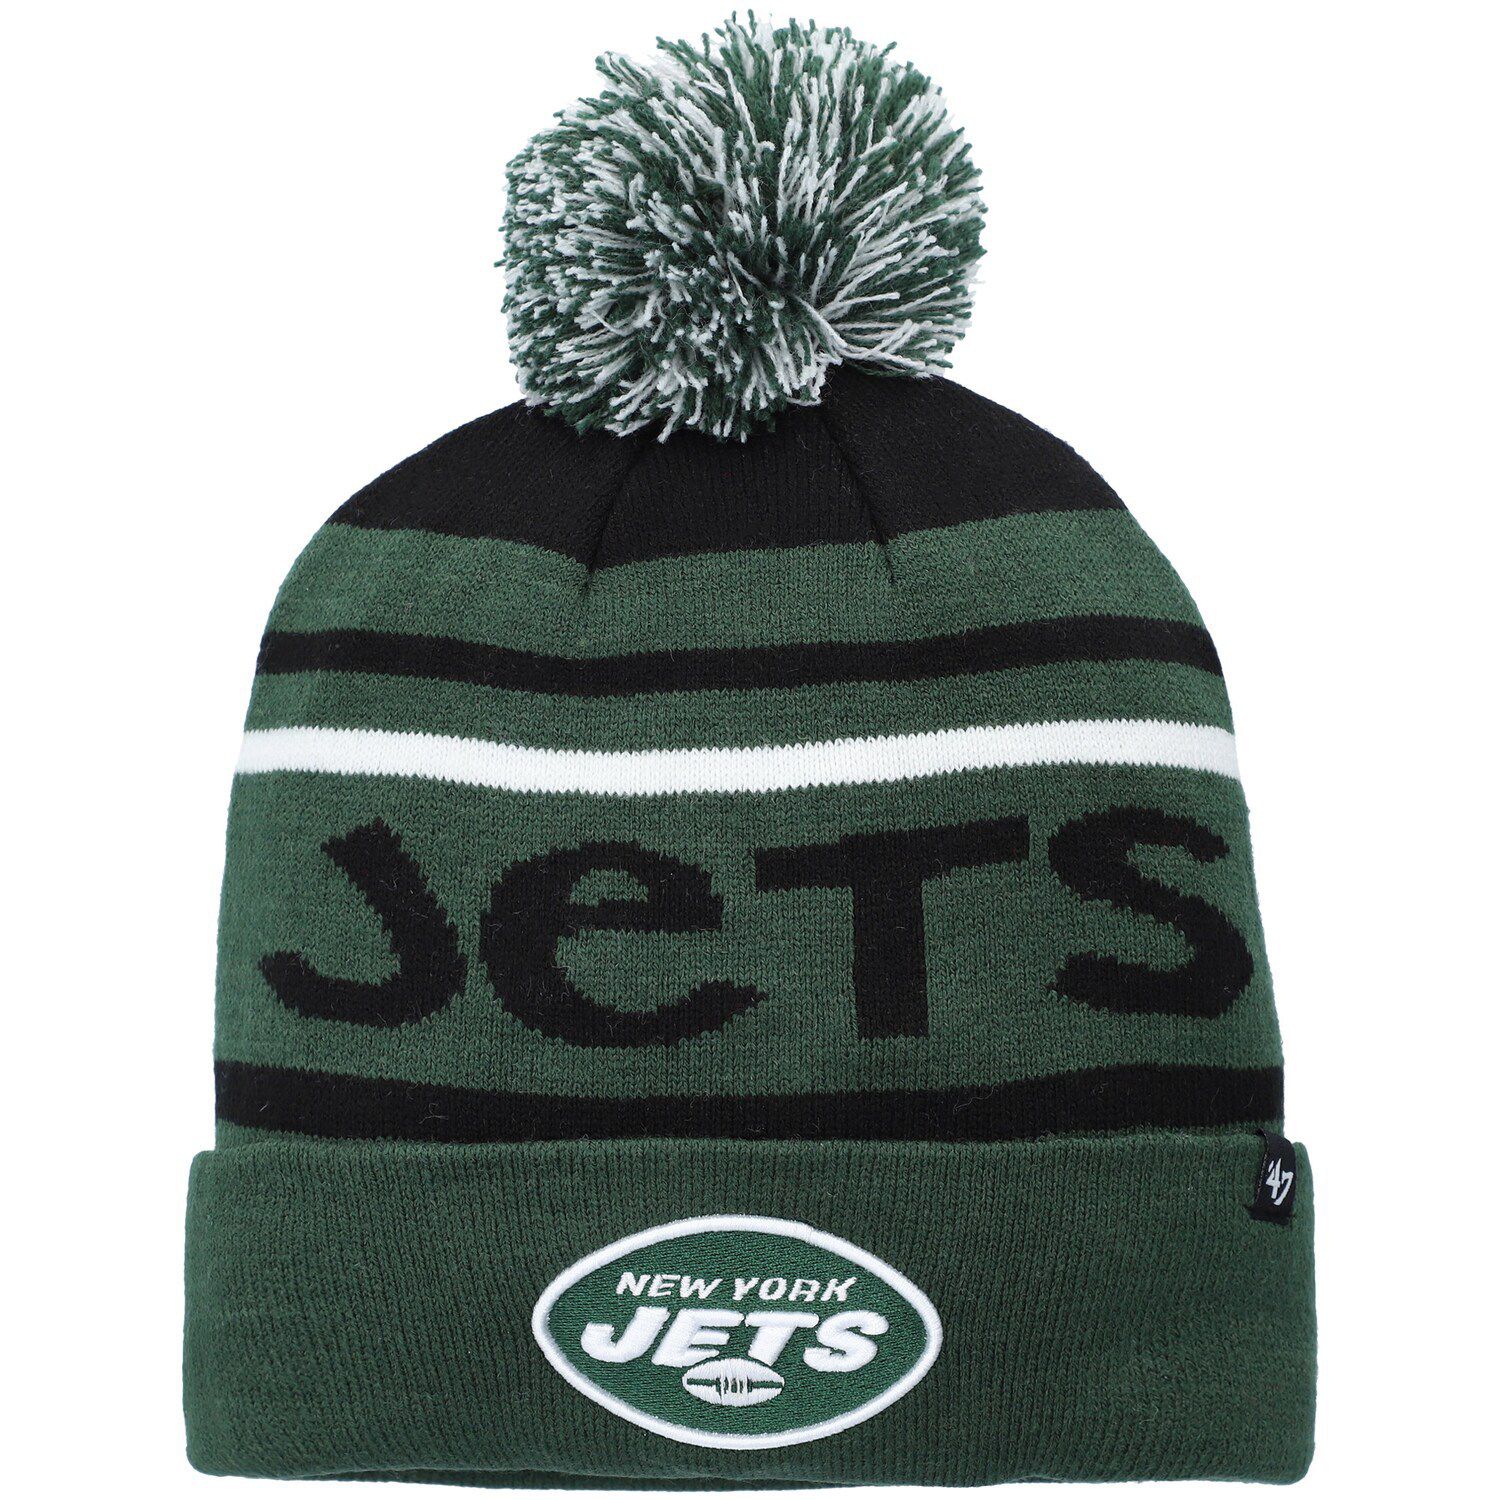 Image for Unbranded Youth '47 Black/Green New York Jets Playground Cuffed Knit Hat With Pom at Kohl's.